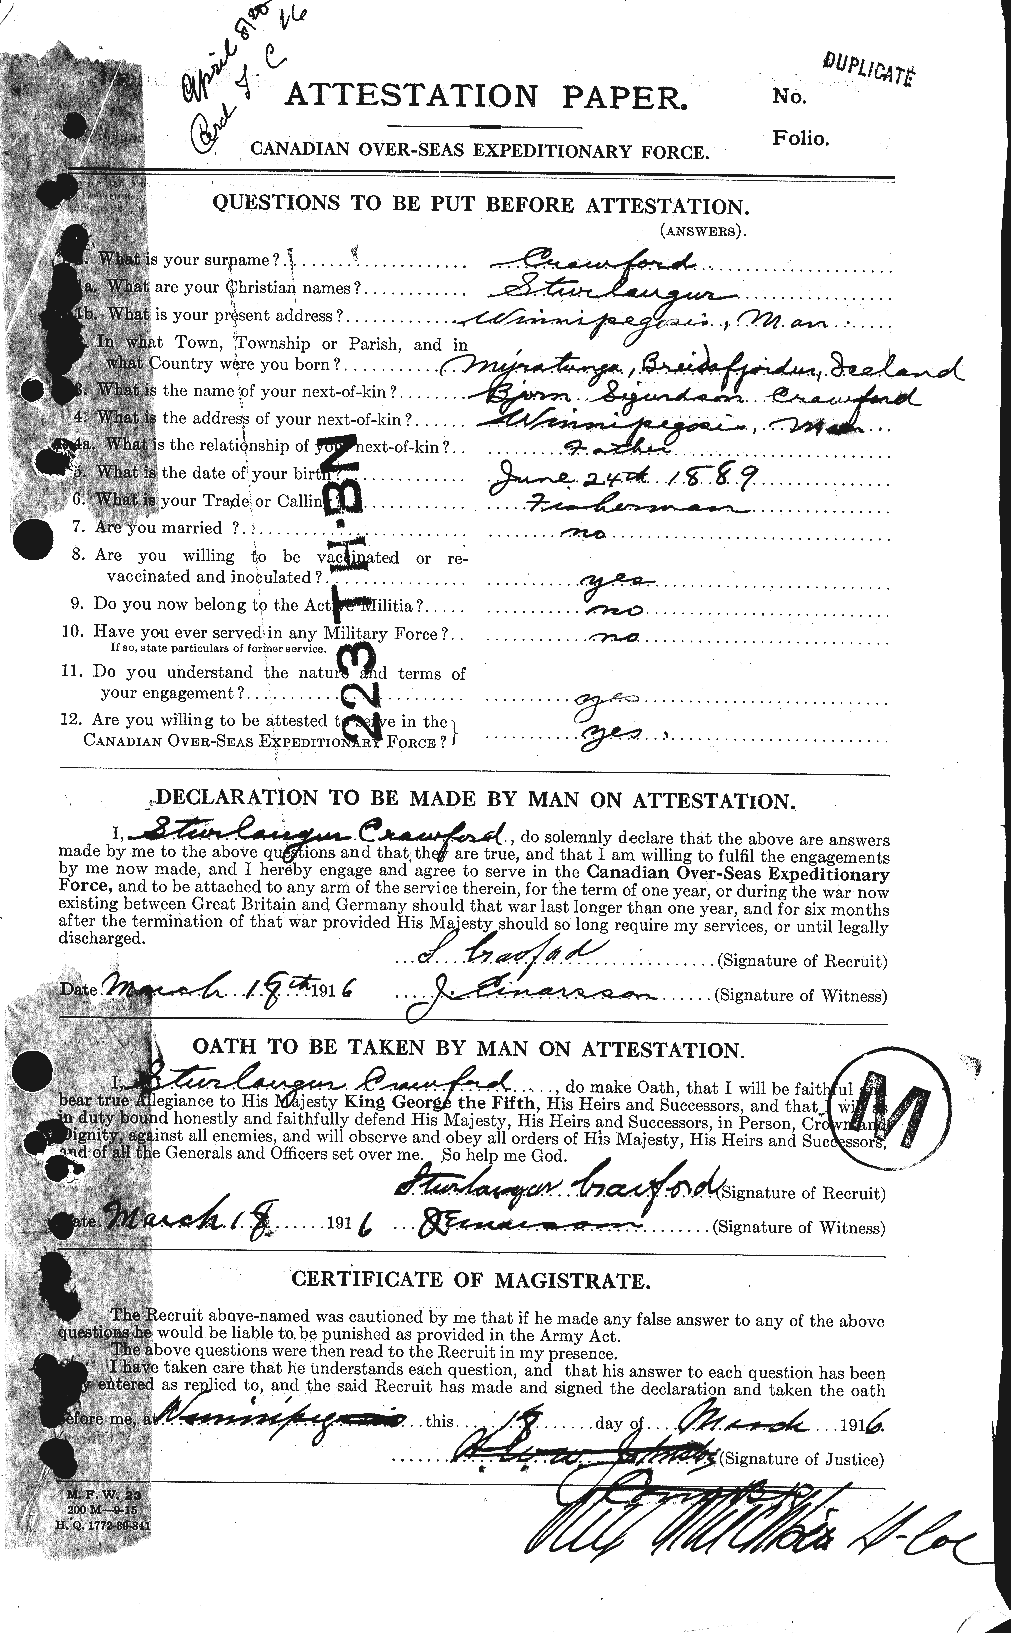 Personnel Records of the First World War - CEF 061368a